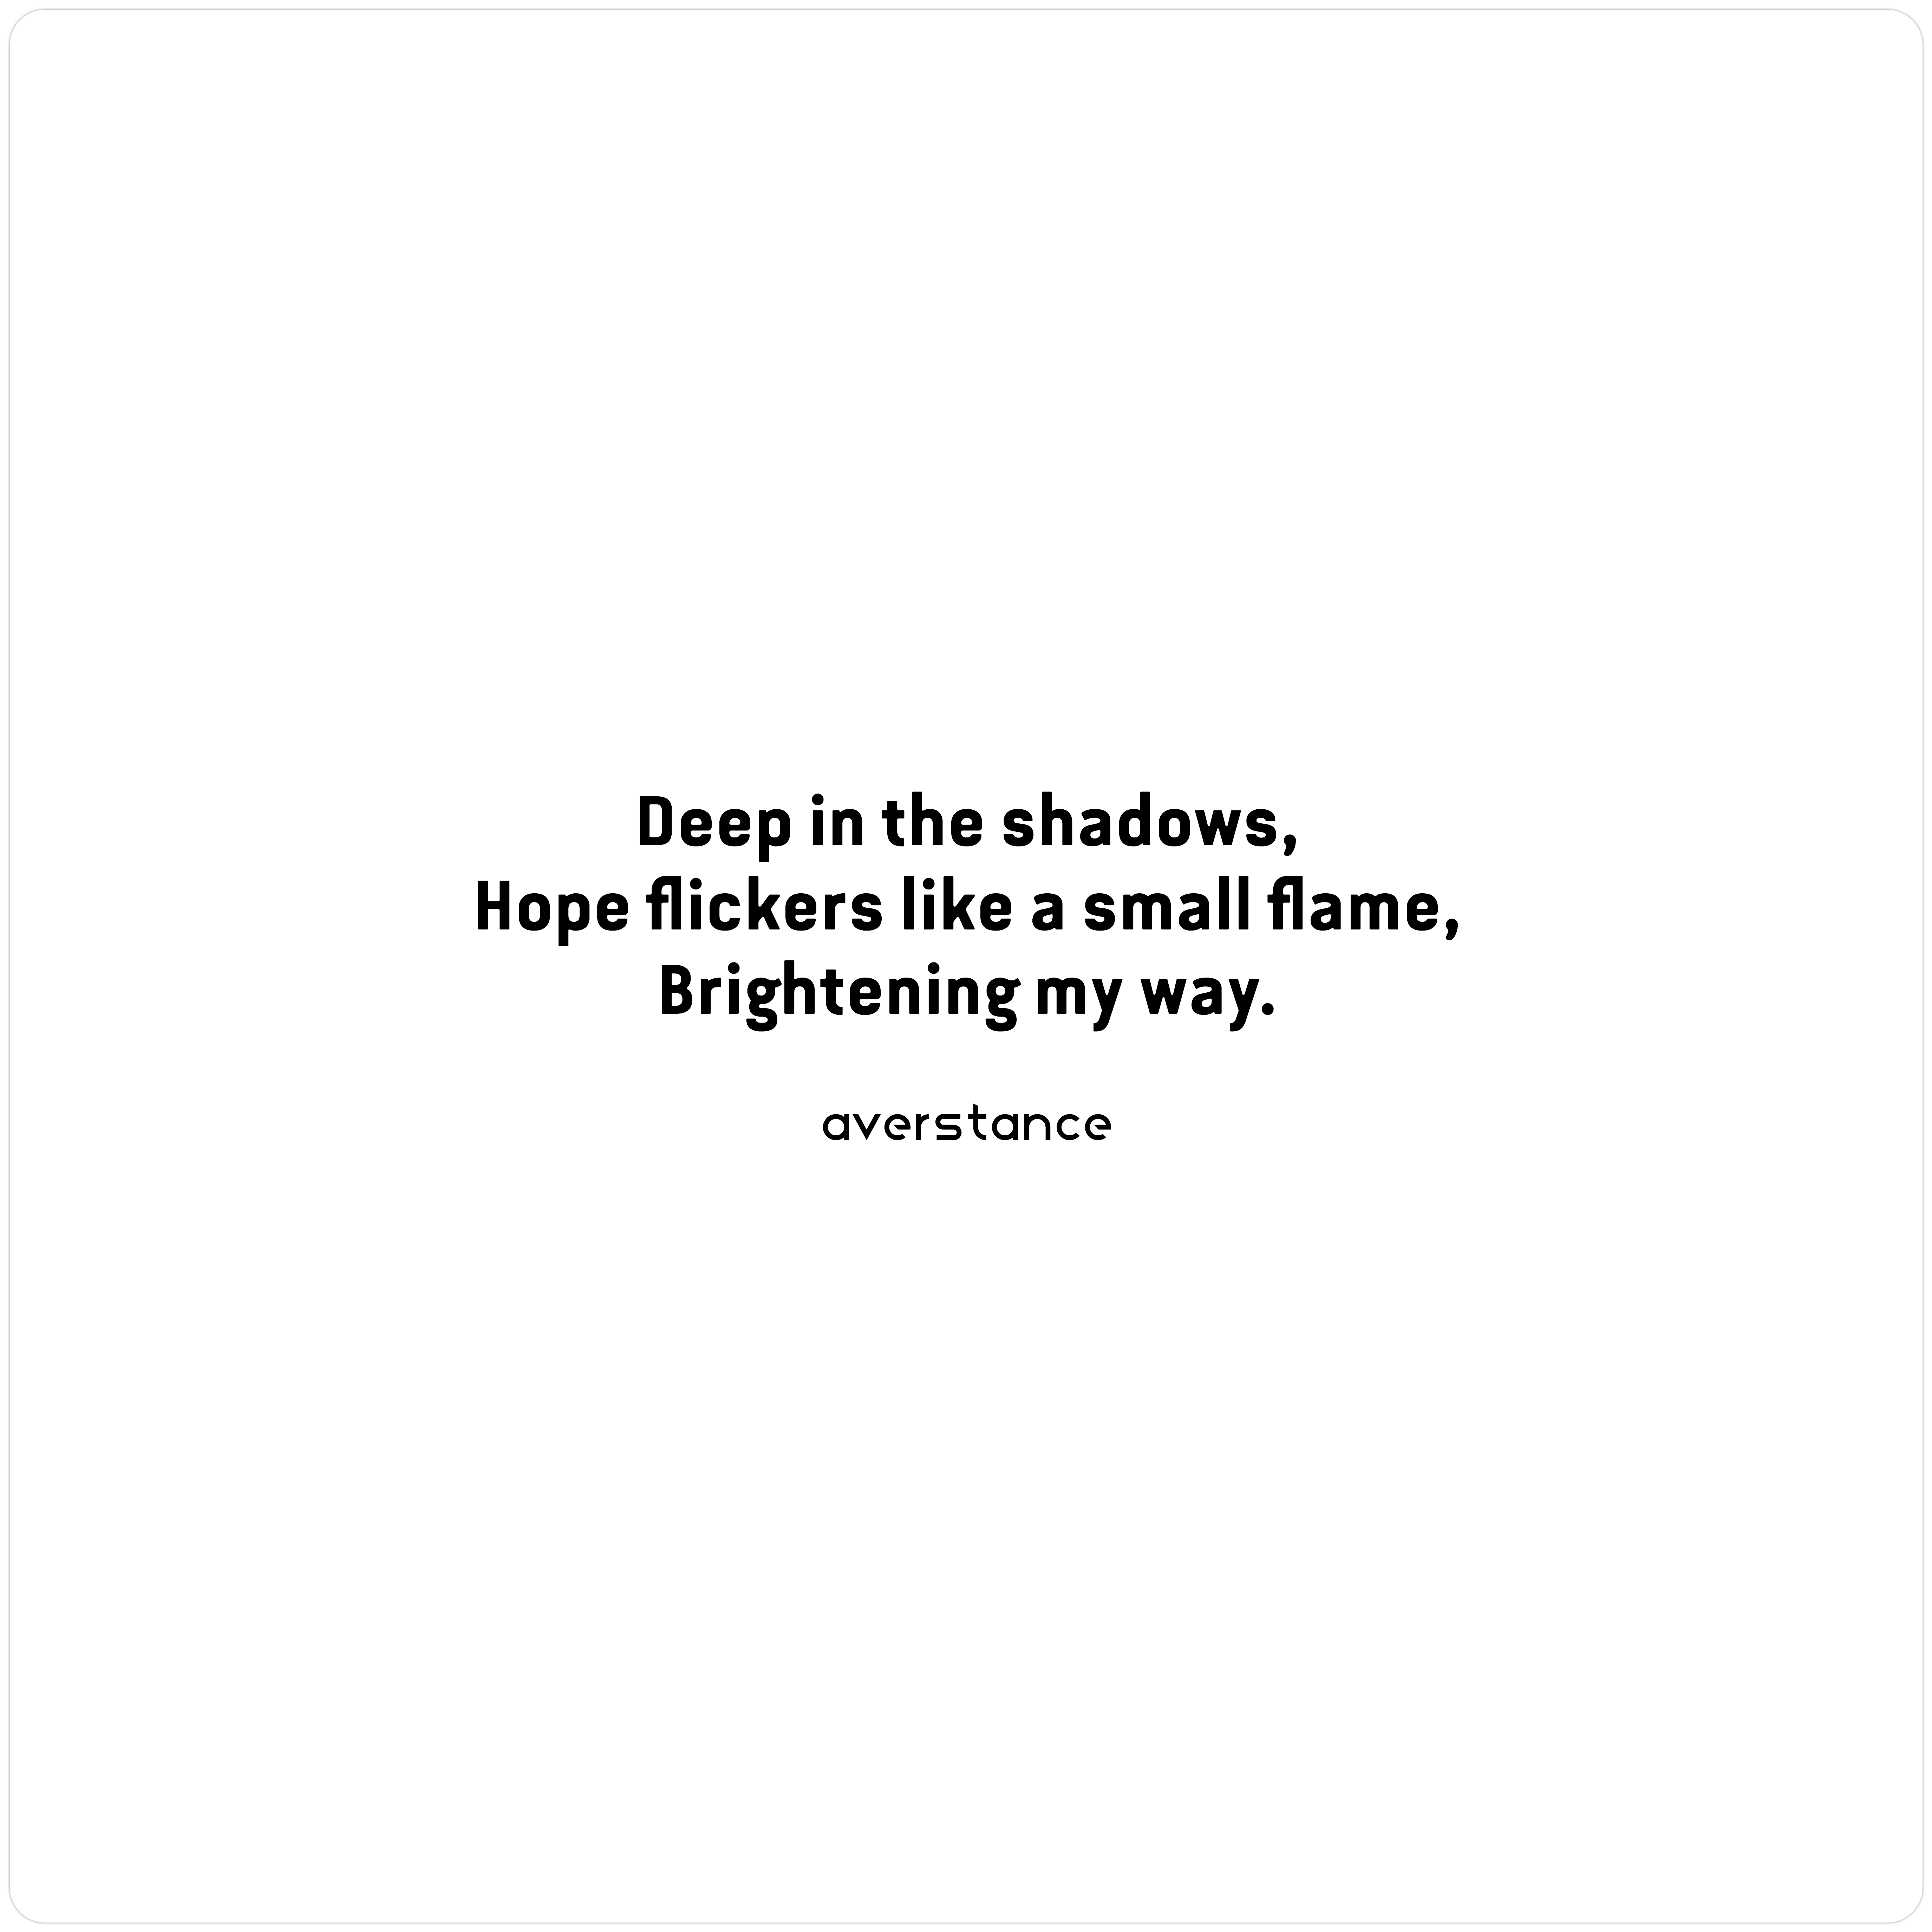 Haiku
Deep in the shadows,
Hope flickers like a small flame,
Brightening my way.
-averstance